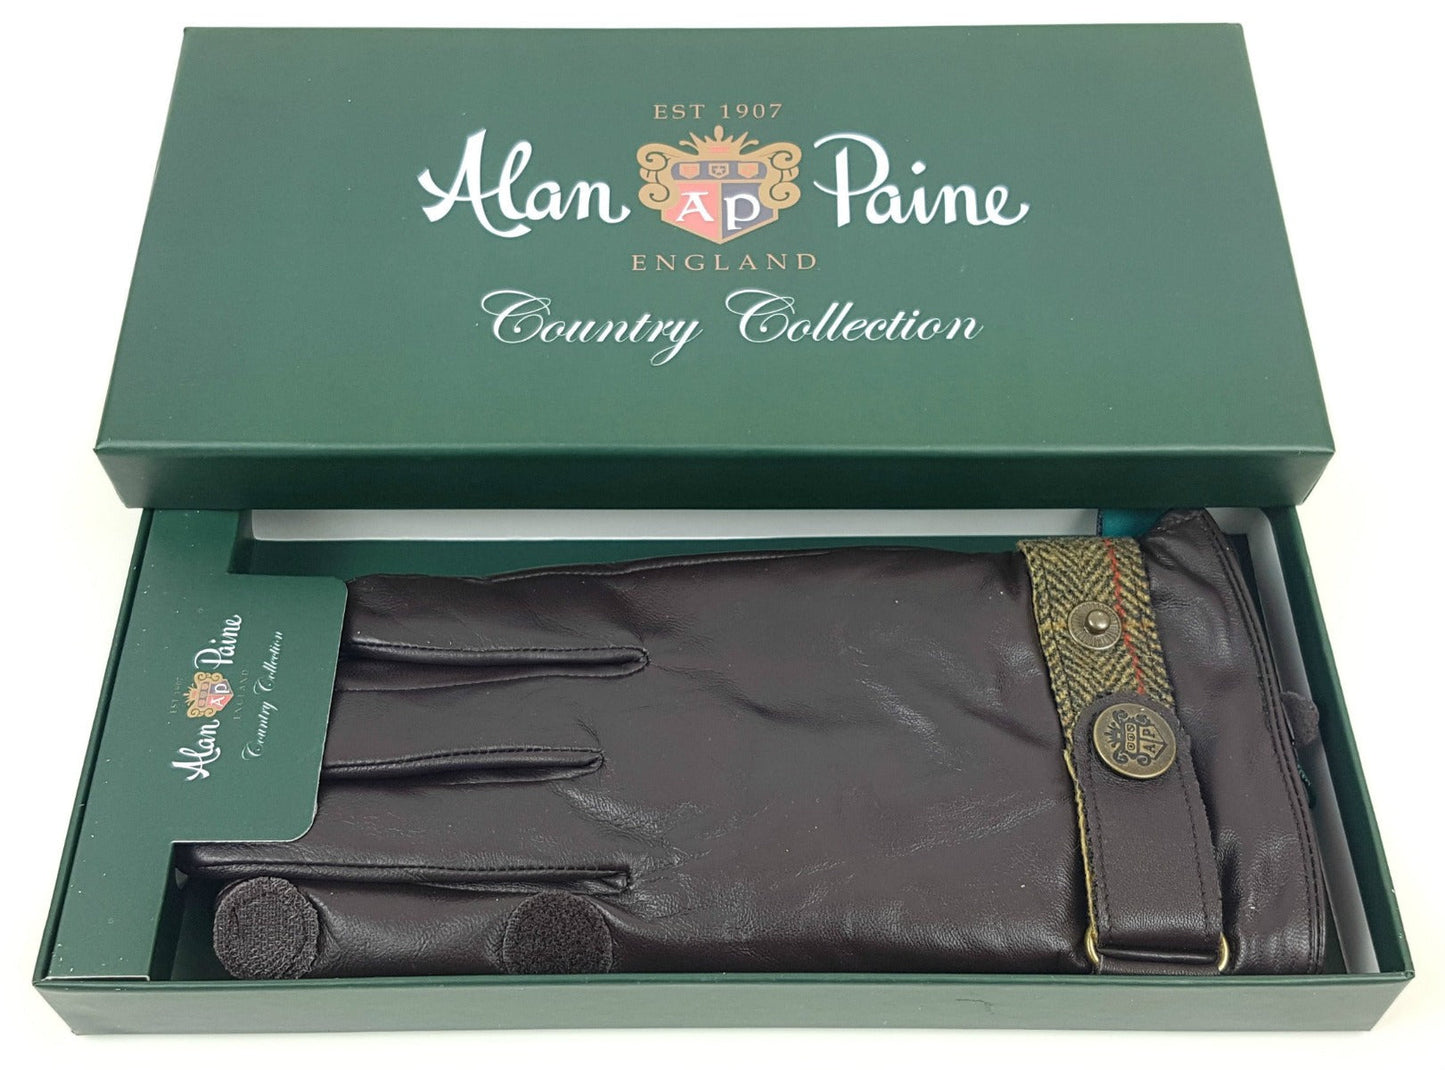 Men's Water Resistant Leather Shooting Gloves